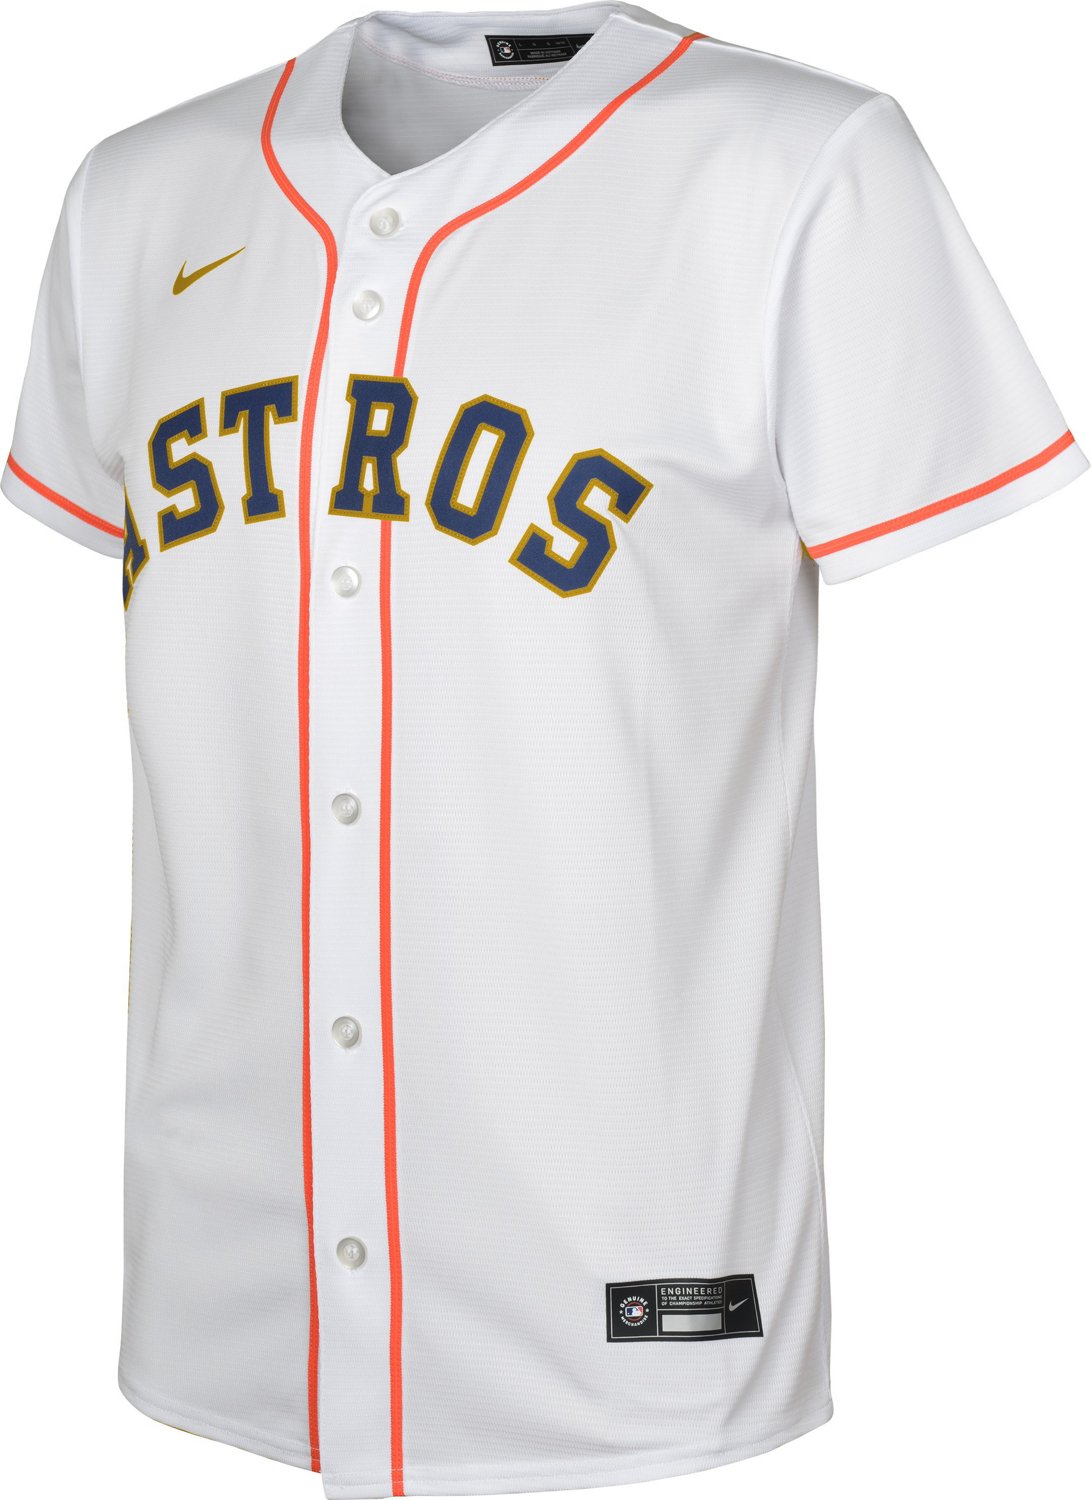 academy youth astros jersey